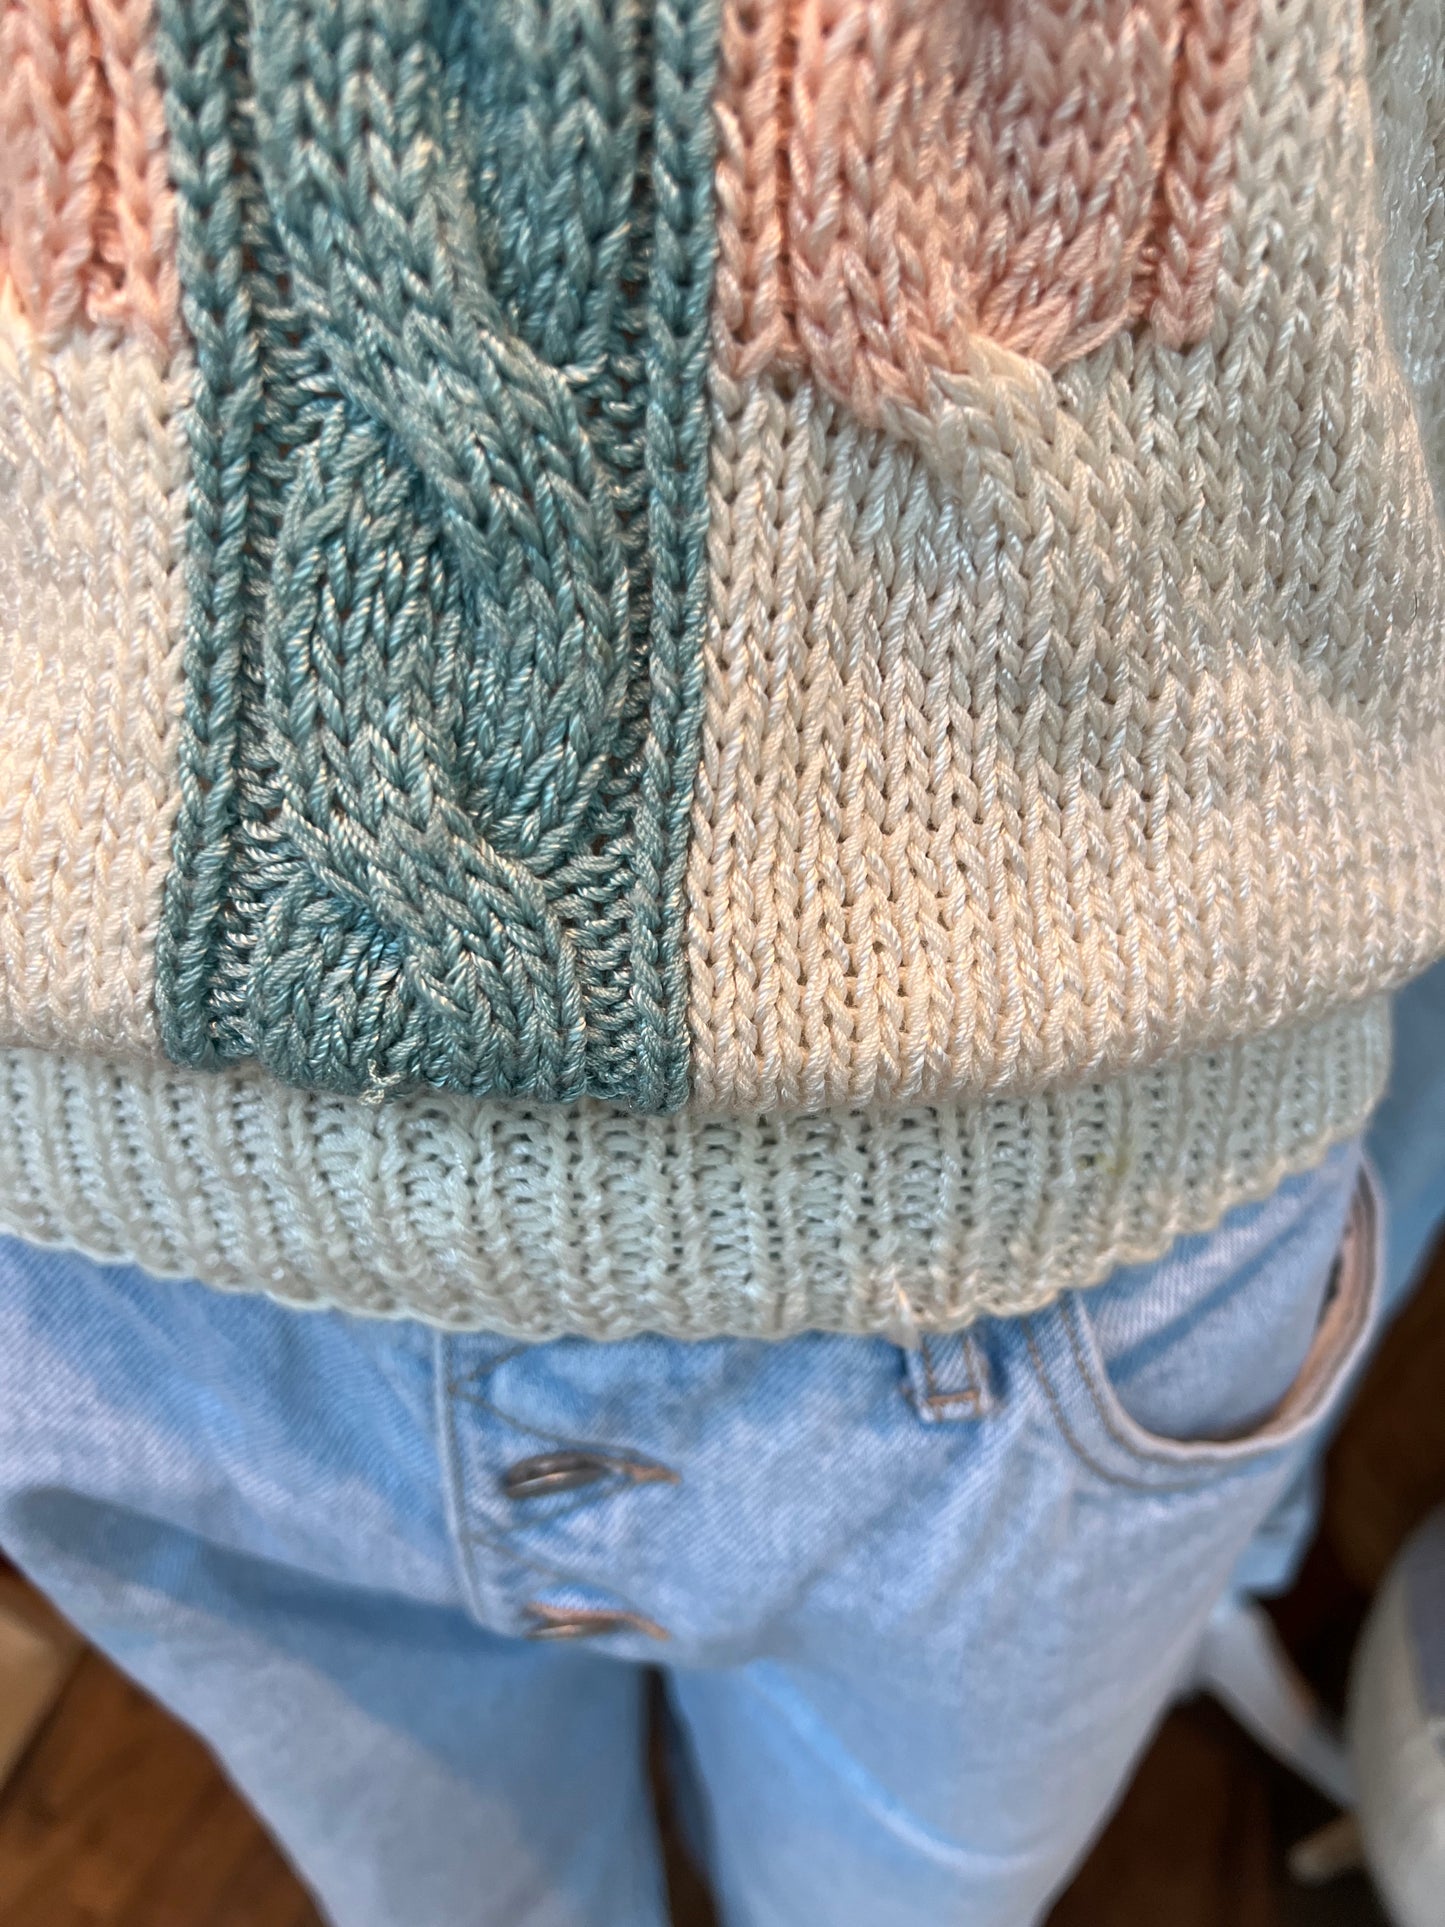 80s vintage sweater #1 - vertical cable stripes